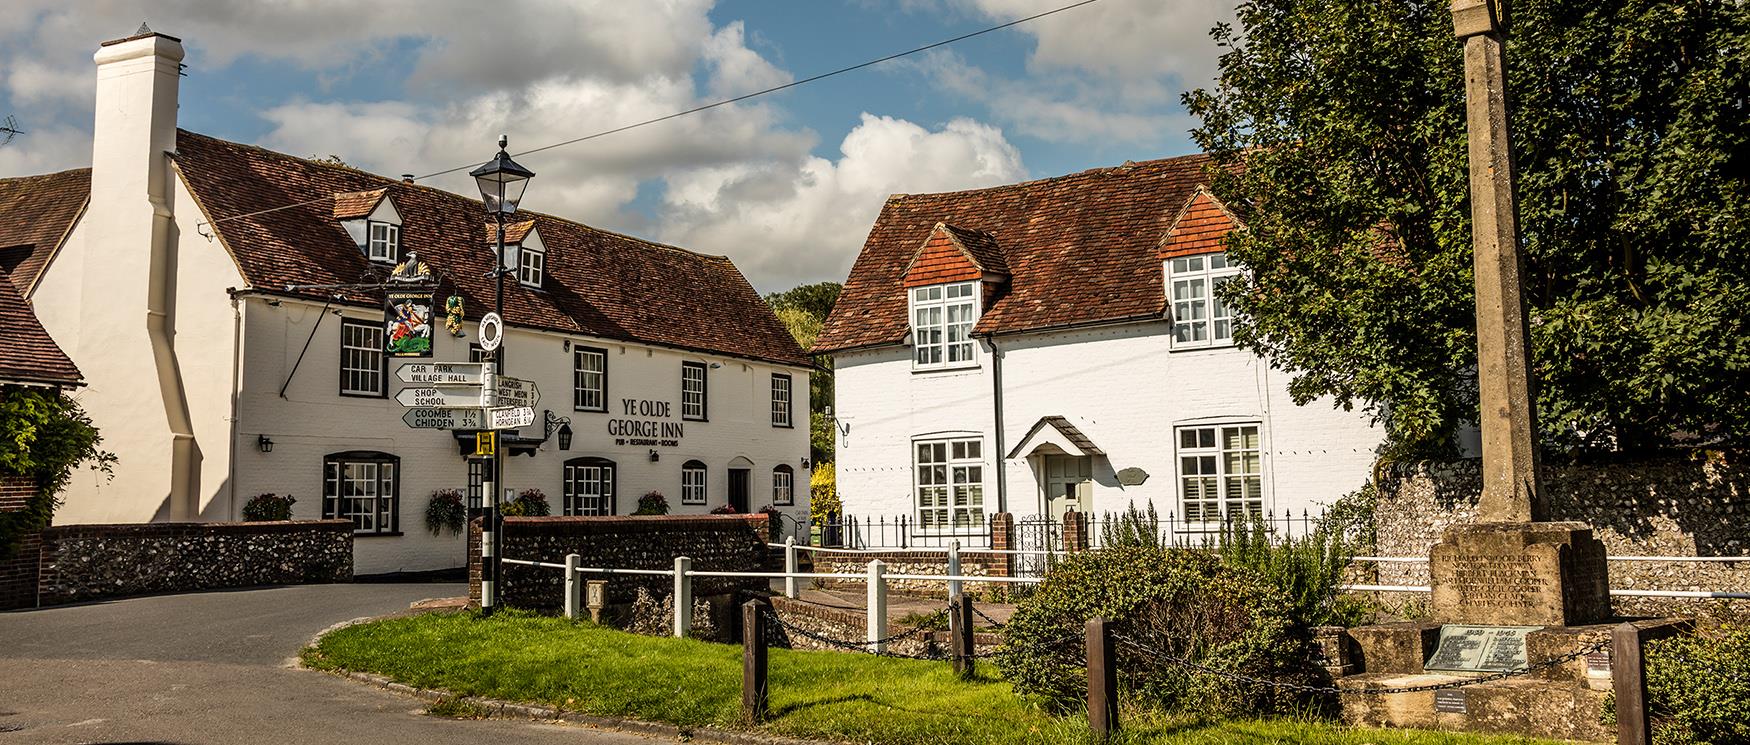 Pubs in the South Downs